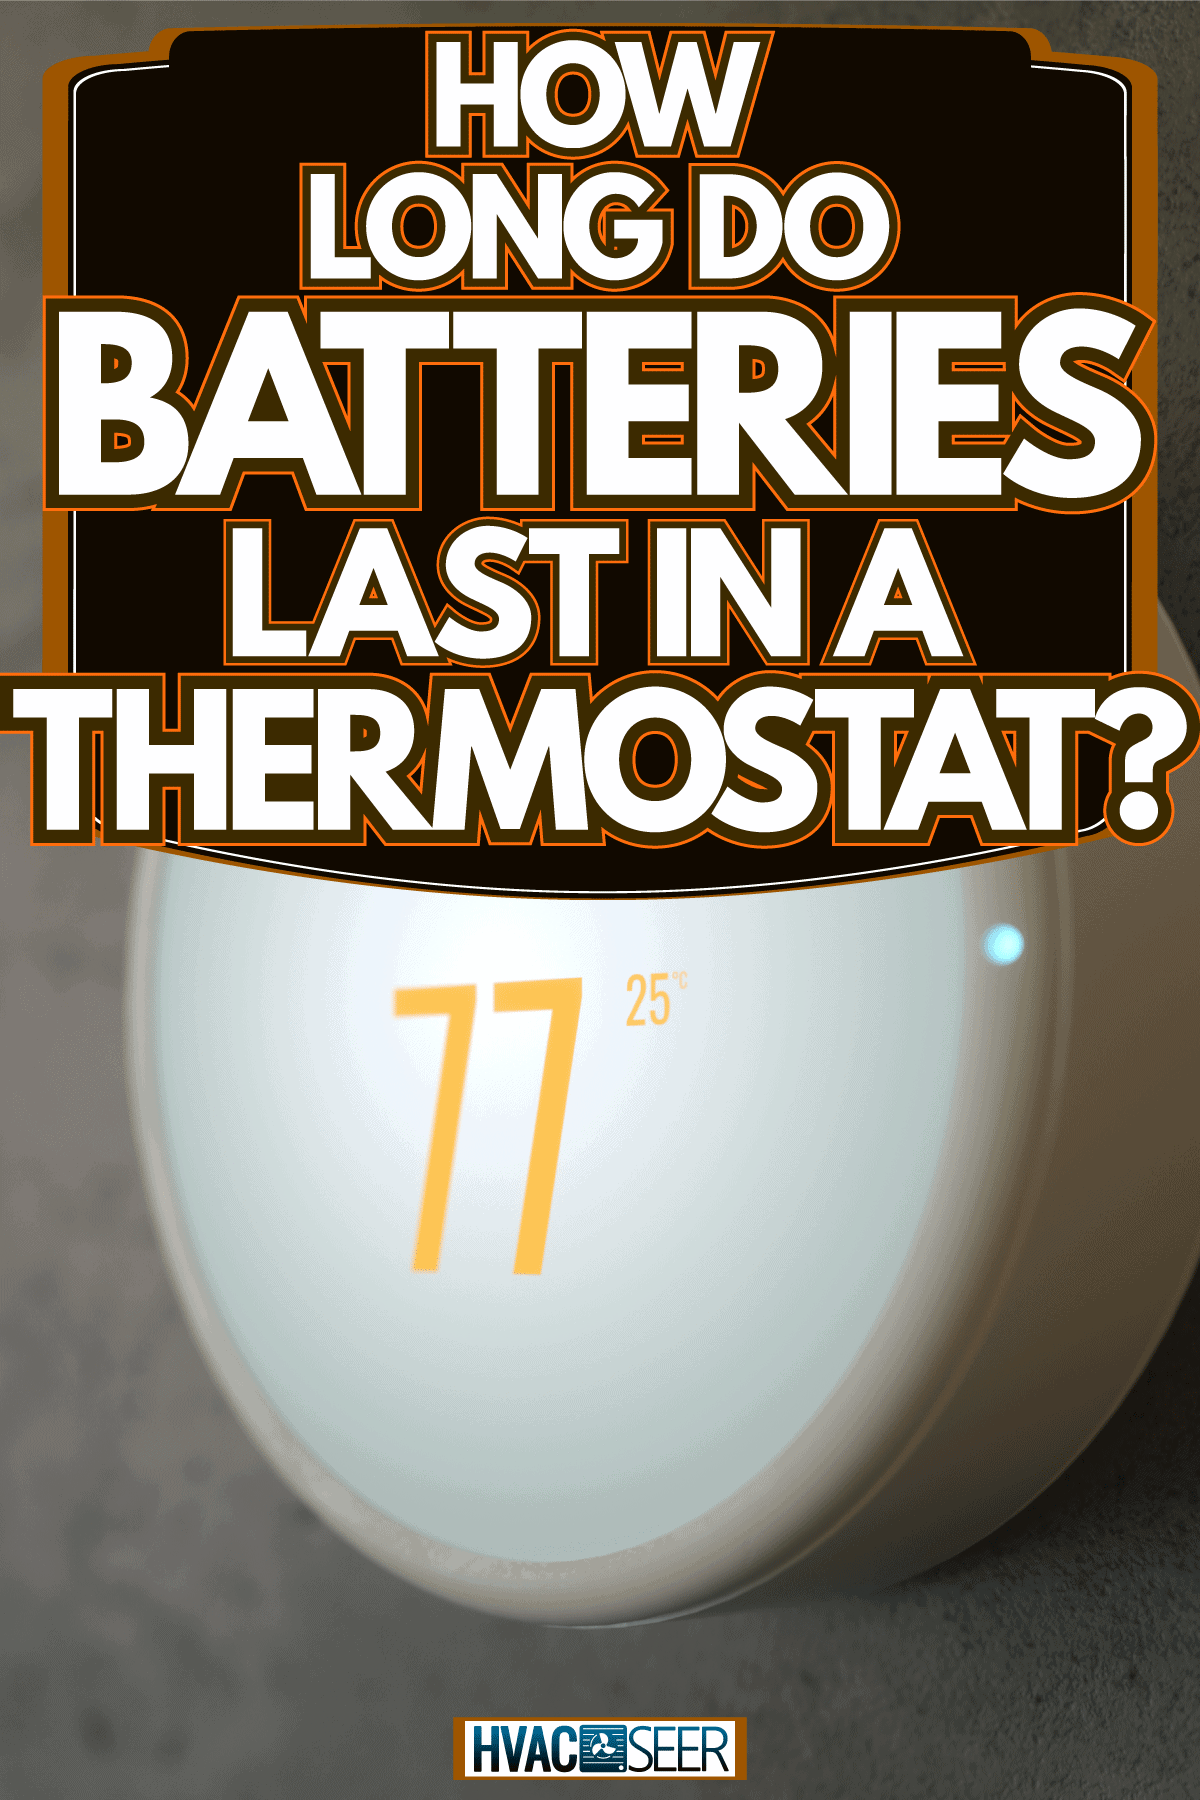 Thermostat set to 77 degrees, How Long Do Batteries Last In A Thermostat?